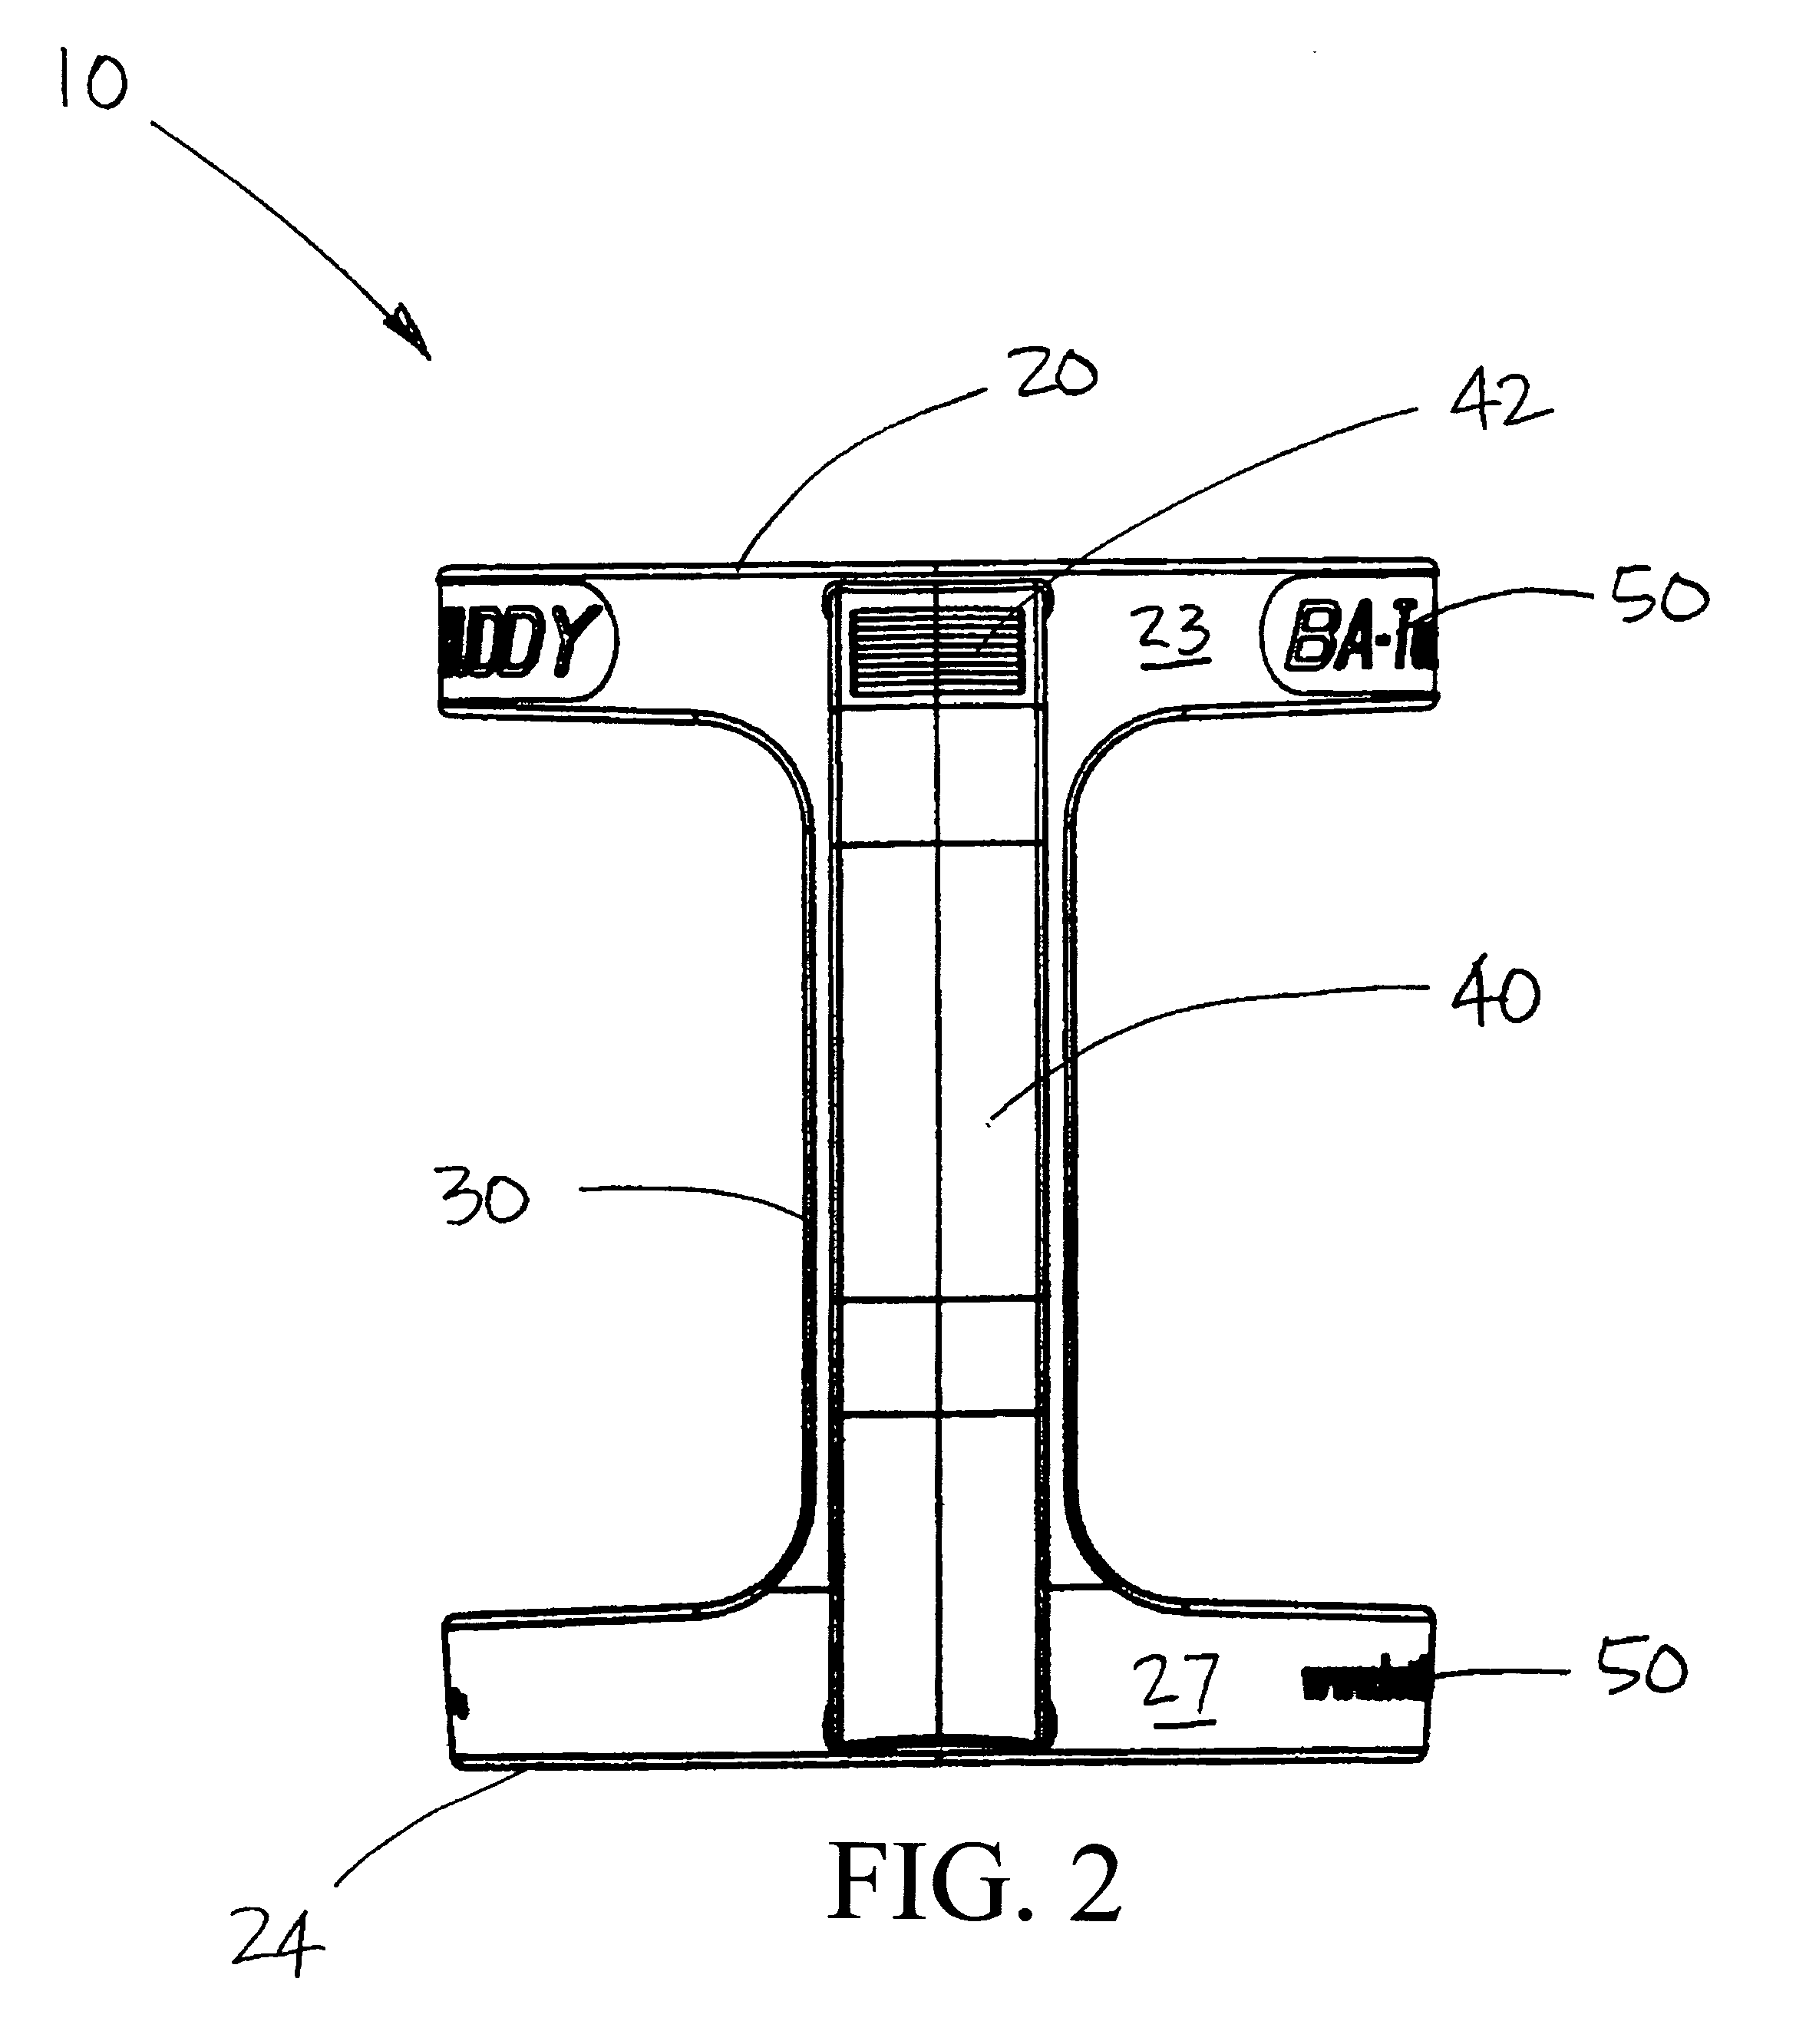 Apparatus to facilitate the holding of large bottles without integral handles